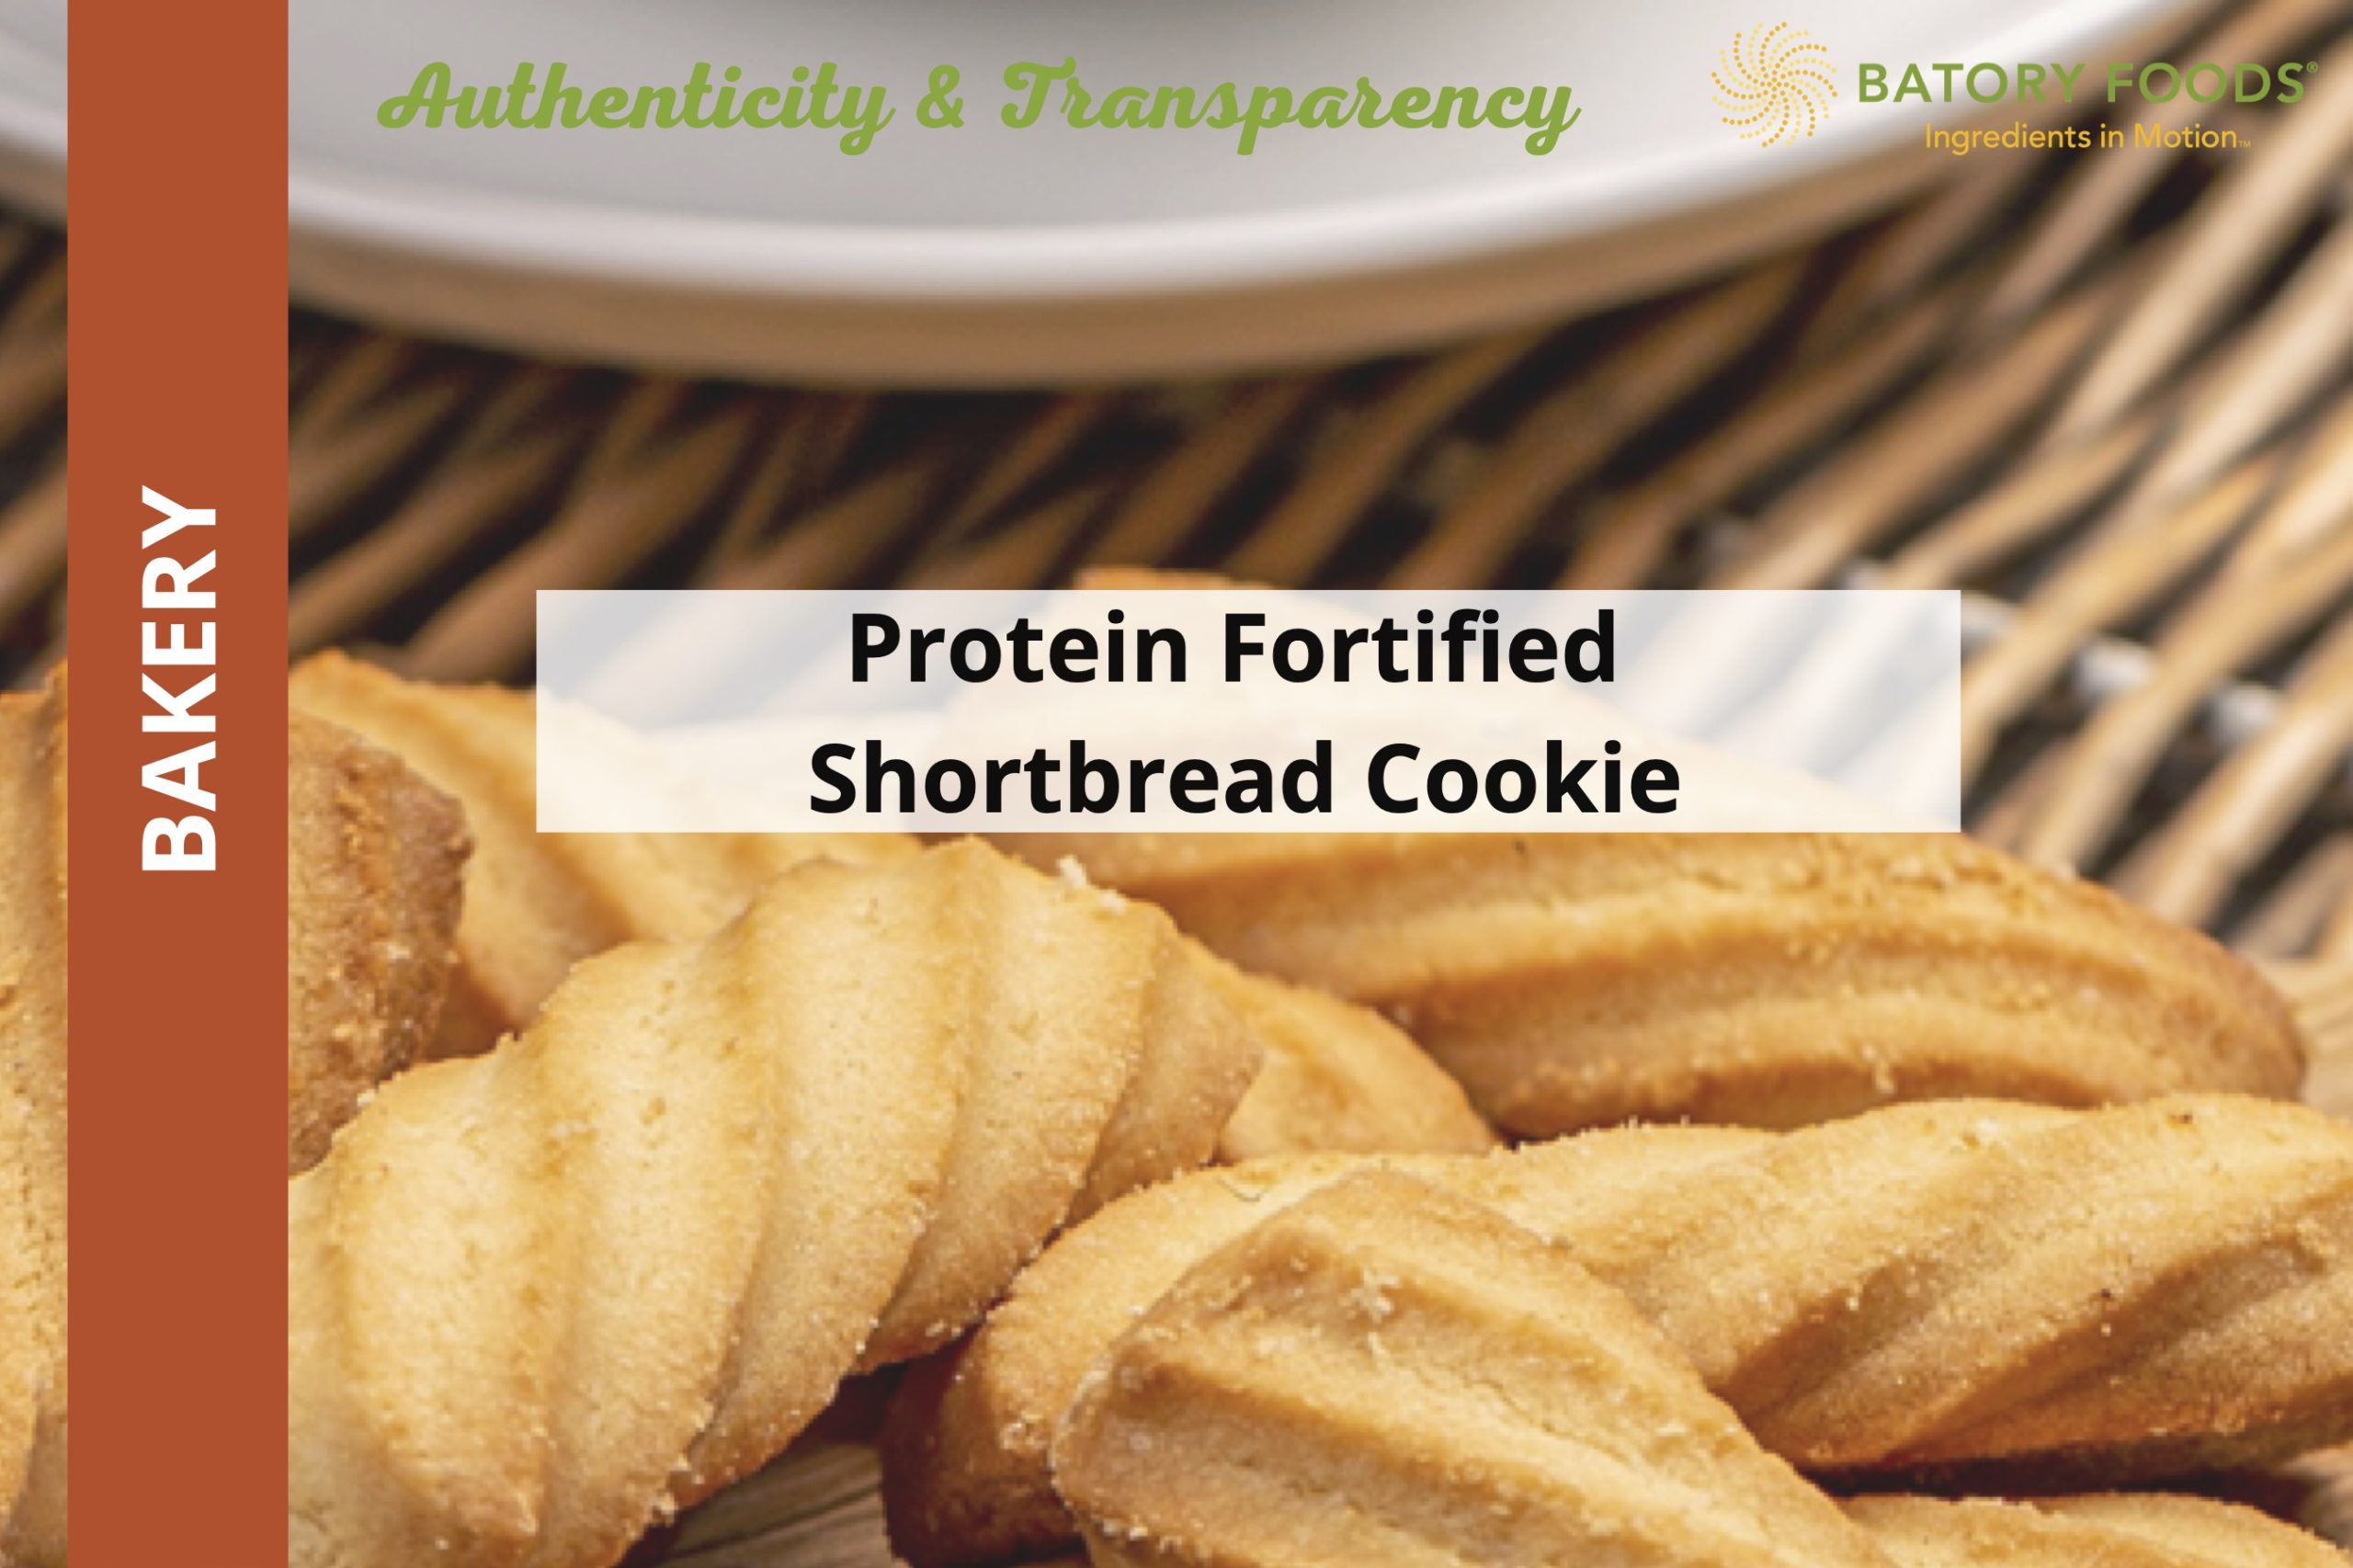 Protein Fortified Shortbread Cookie